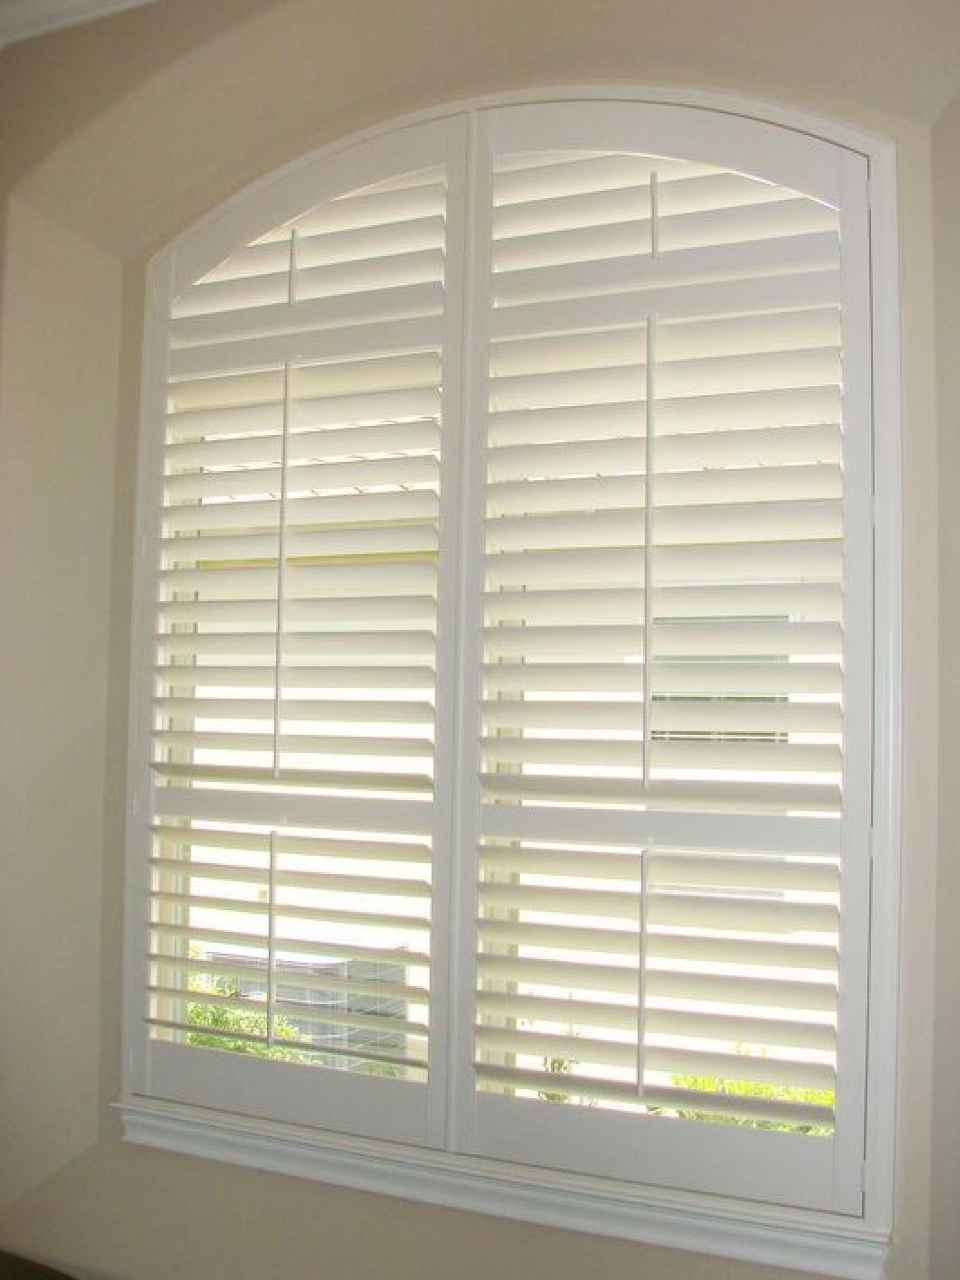 How to Measure for Shutters